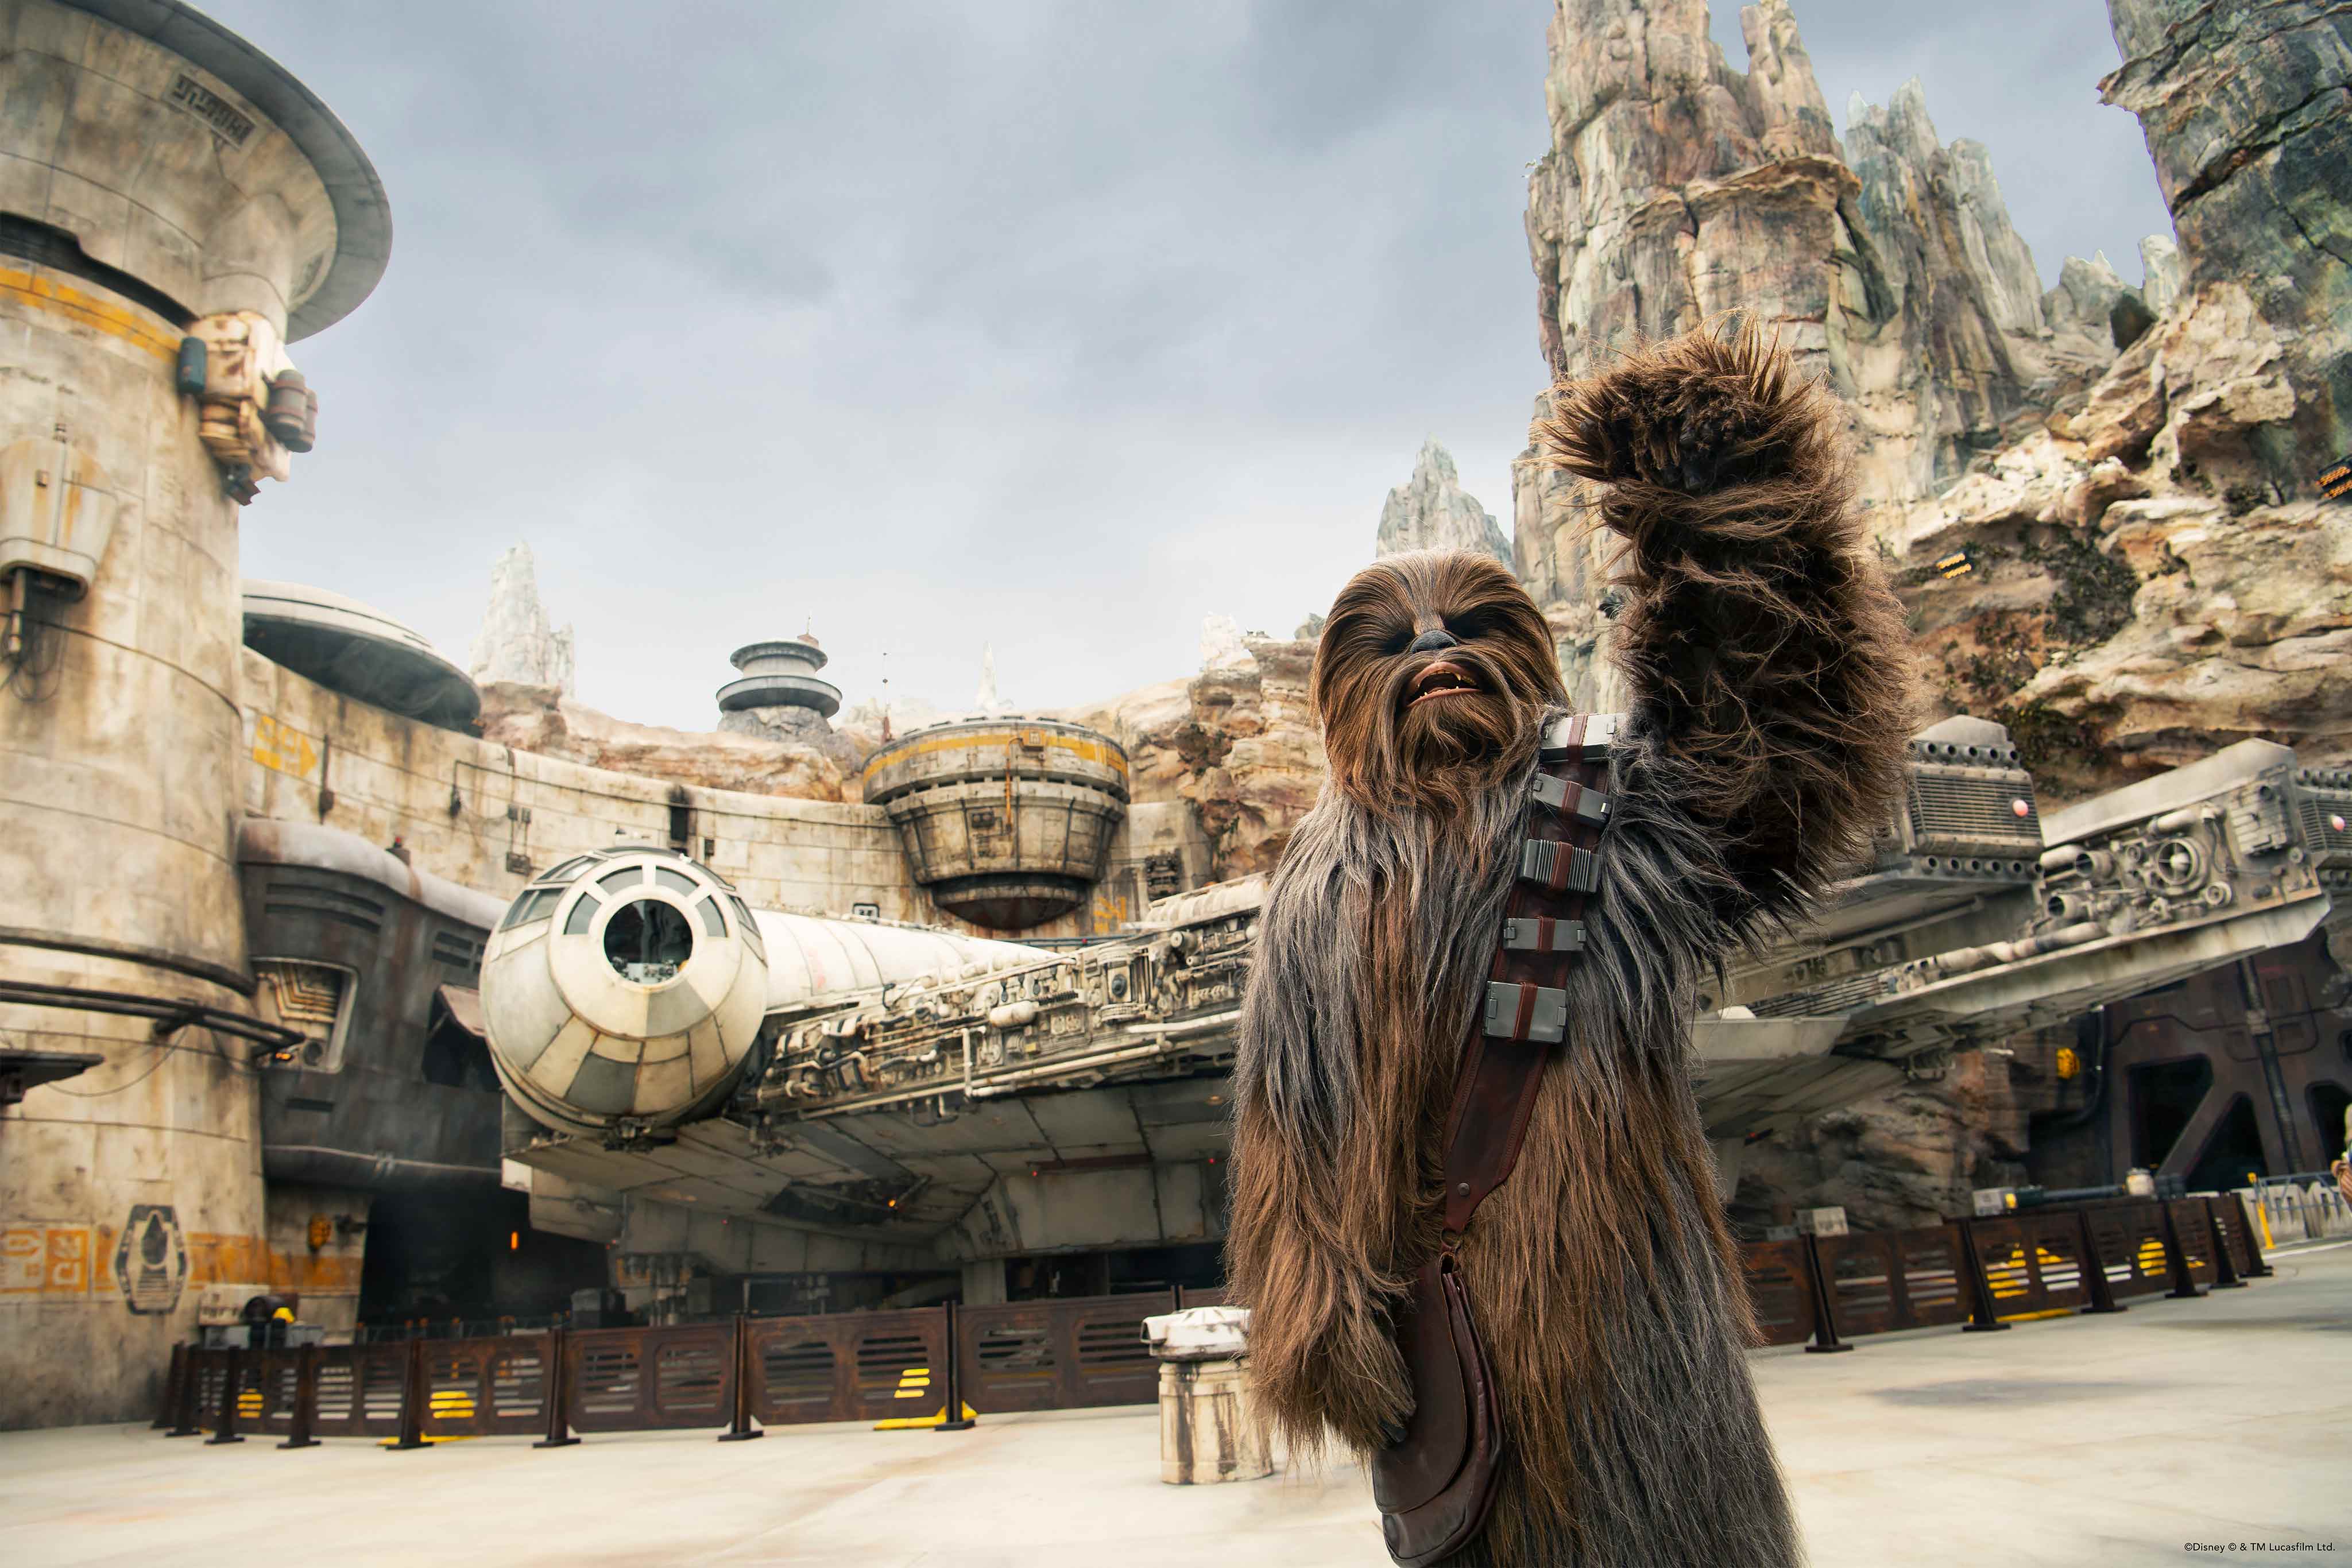 Daytime shot of Chewbacca holding up his left fist in as he stares off into the distance. Behind him is the Millennium Falcon. Star Wars: Galaxy's Edge at Disney's Hollywood Studios®. Lake Buena Vista, Florida.